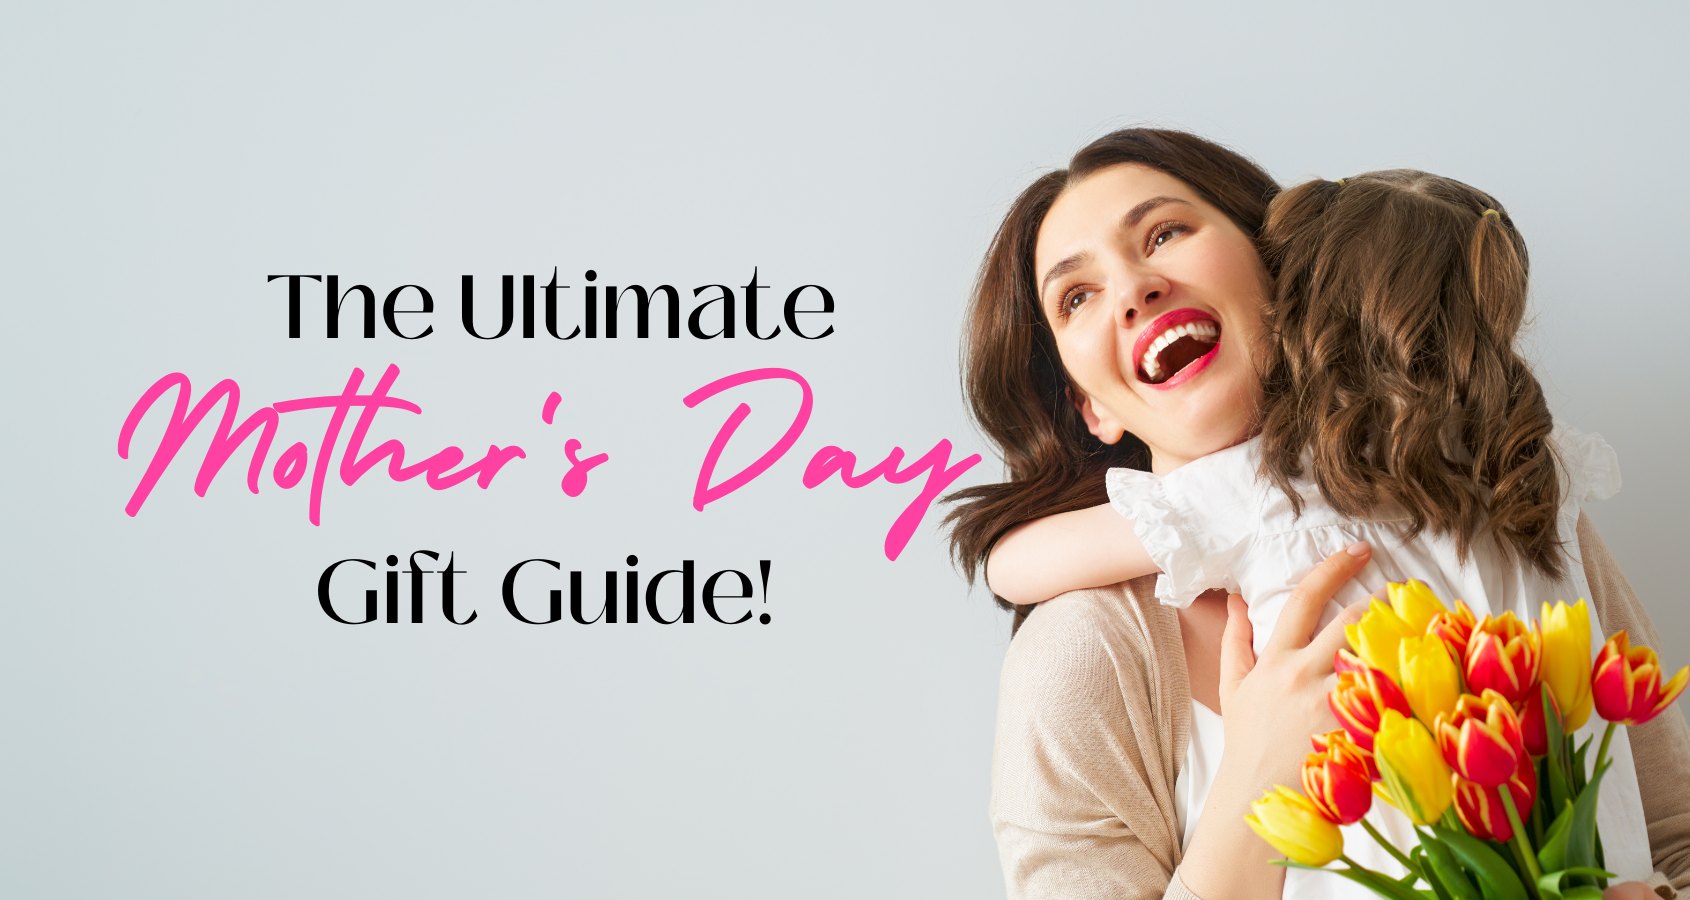 The Ultimate Mother's Day Gift Guide